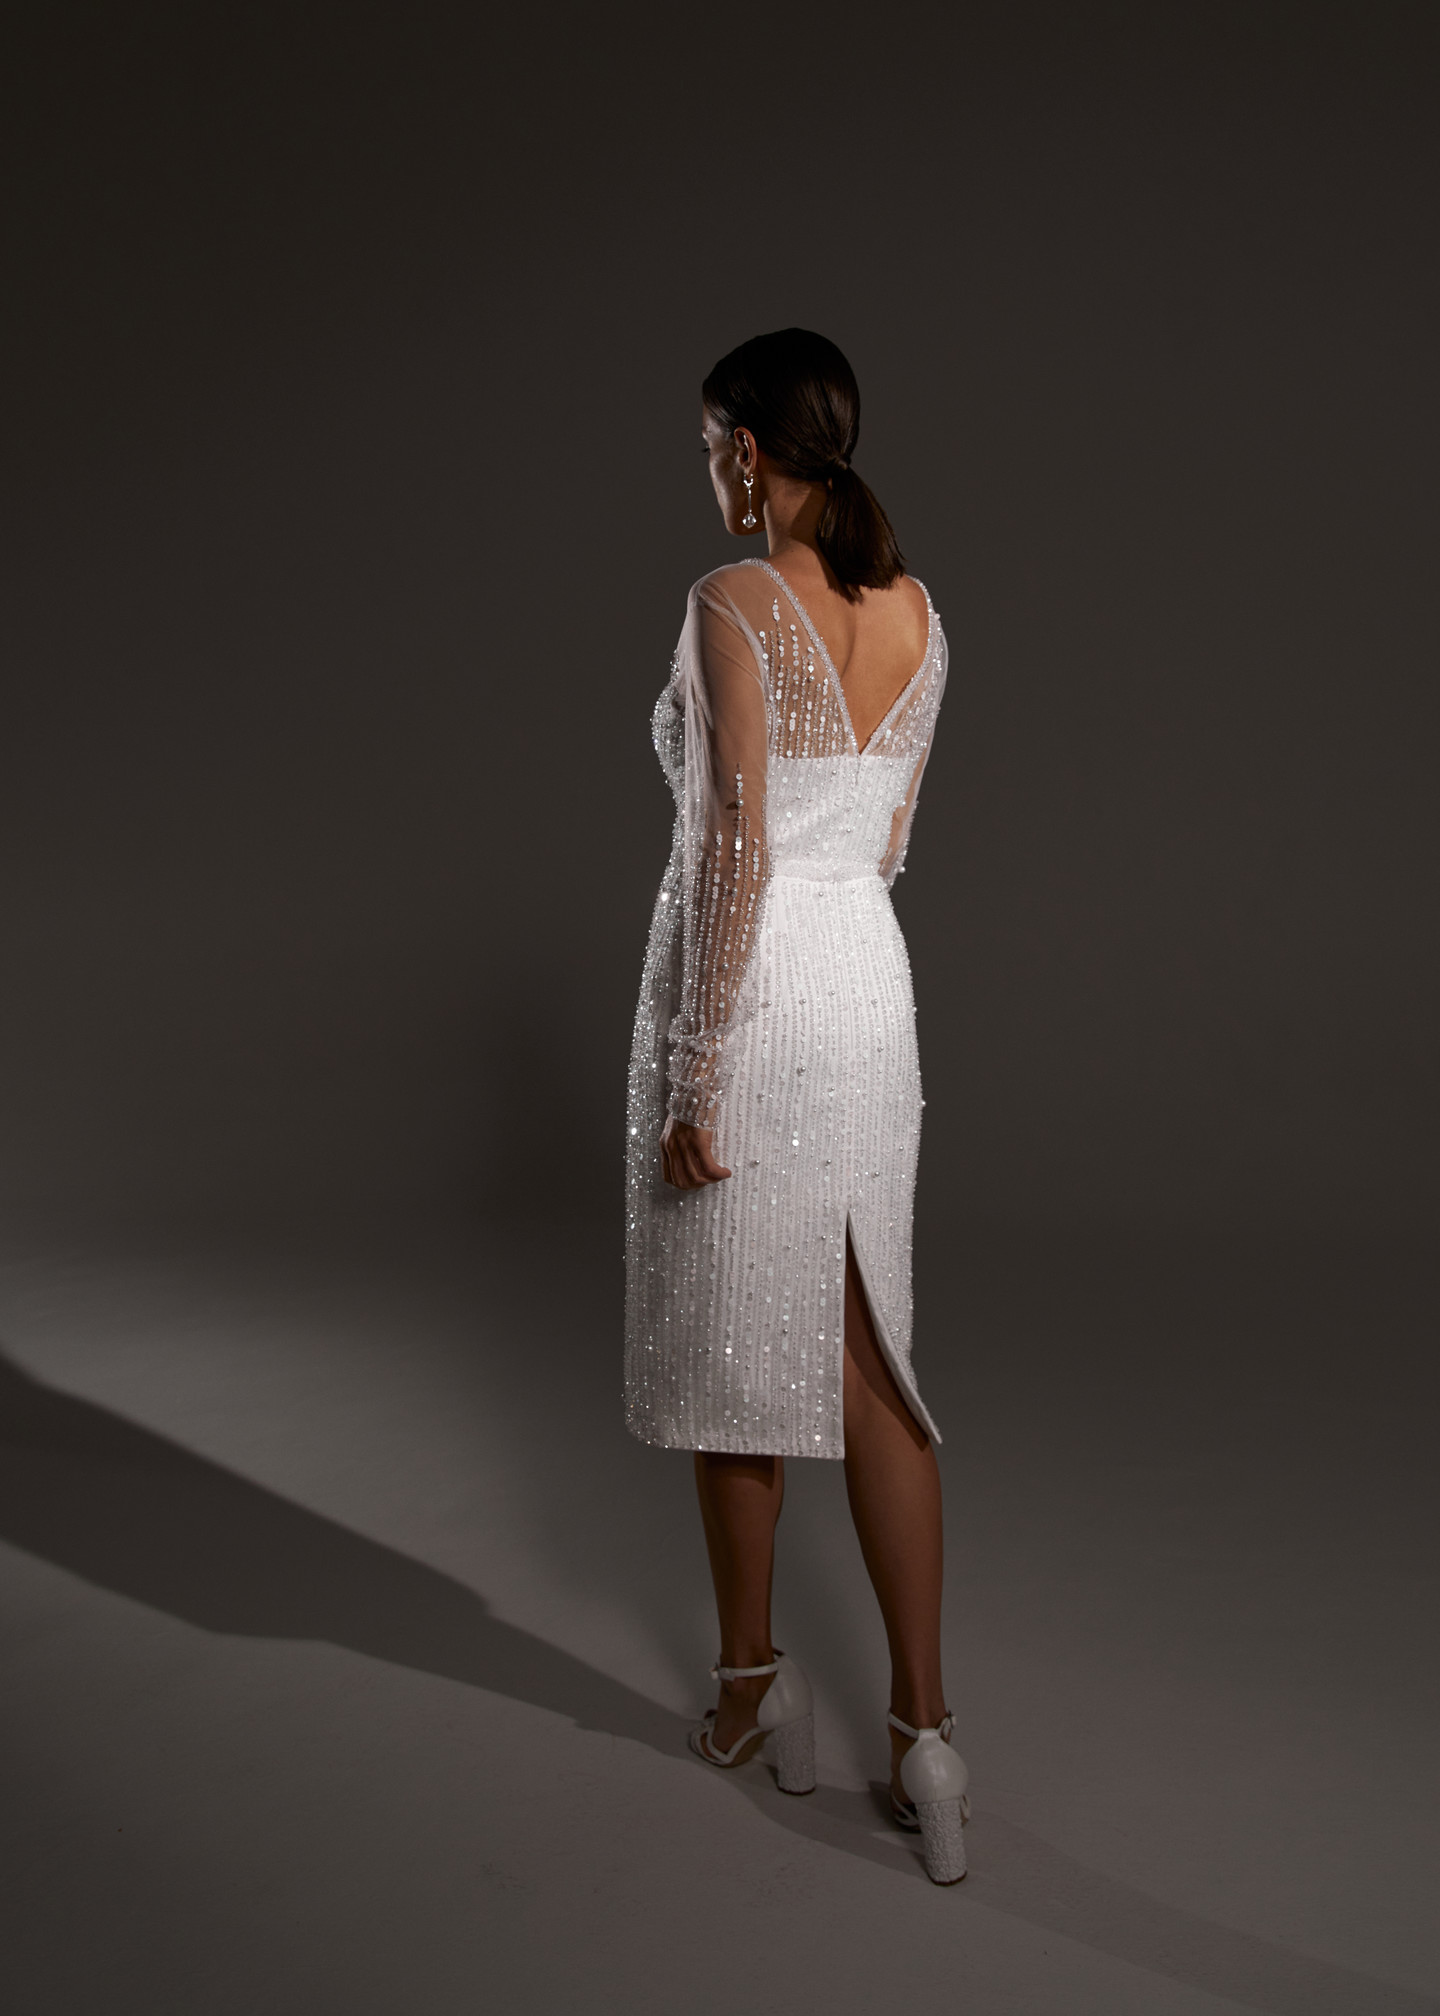 Ari dress, 2021, couture, dress, bridal, off-white, embroidery, sheath silhouette, sleeves